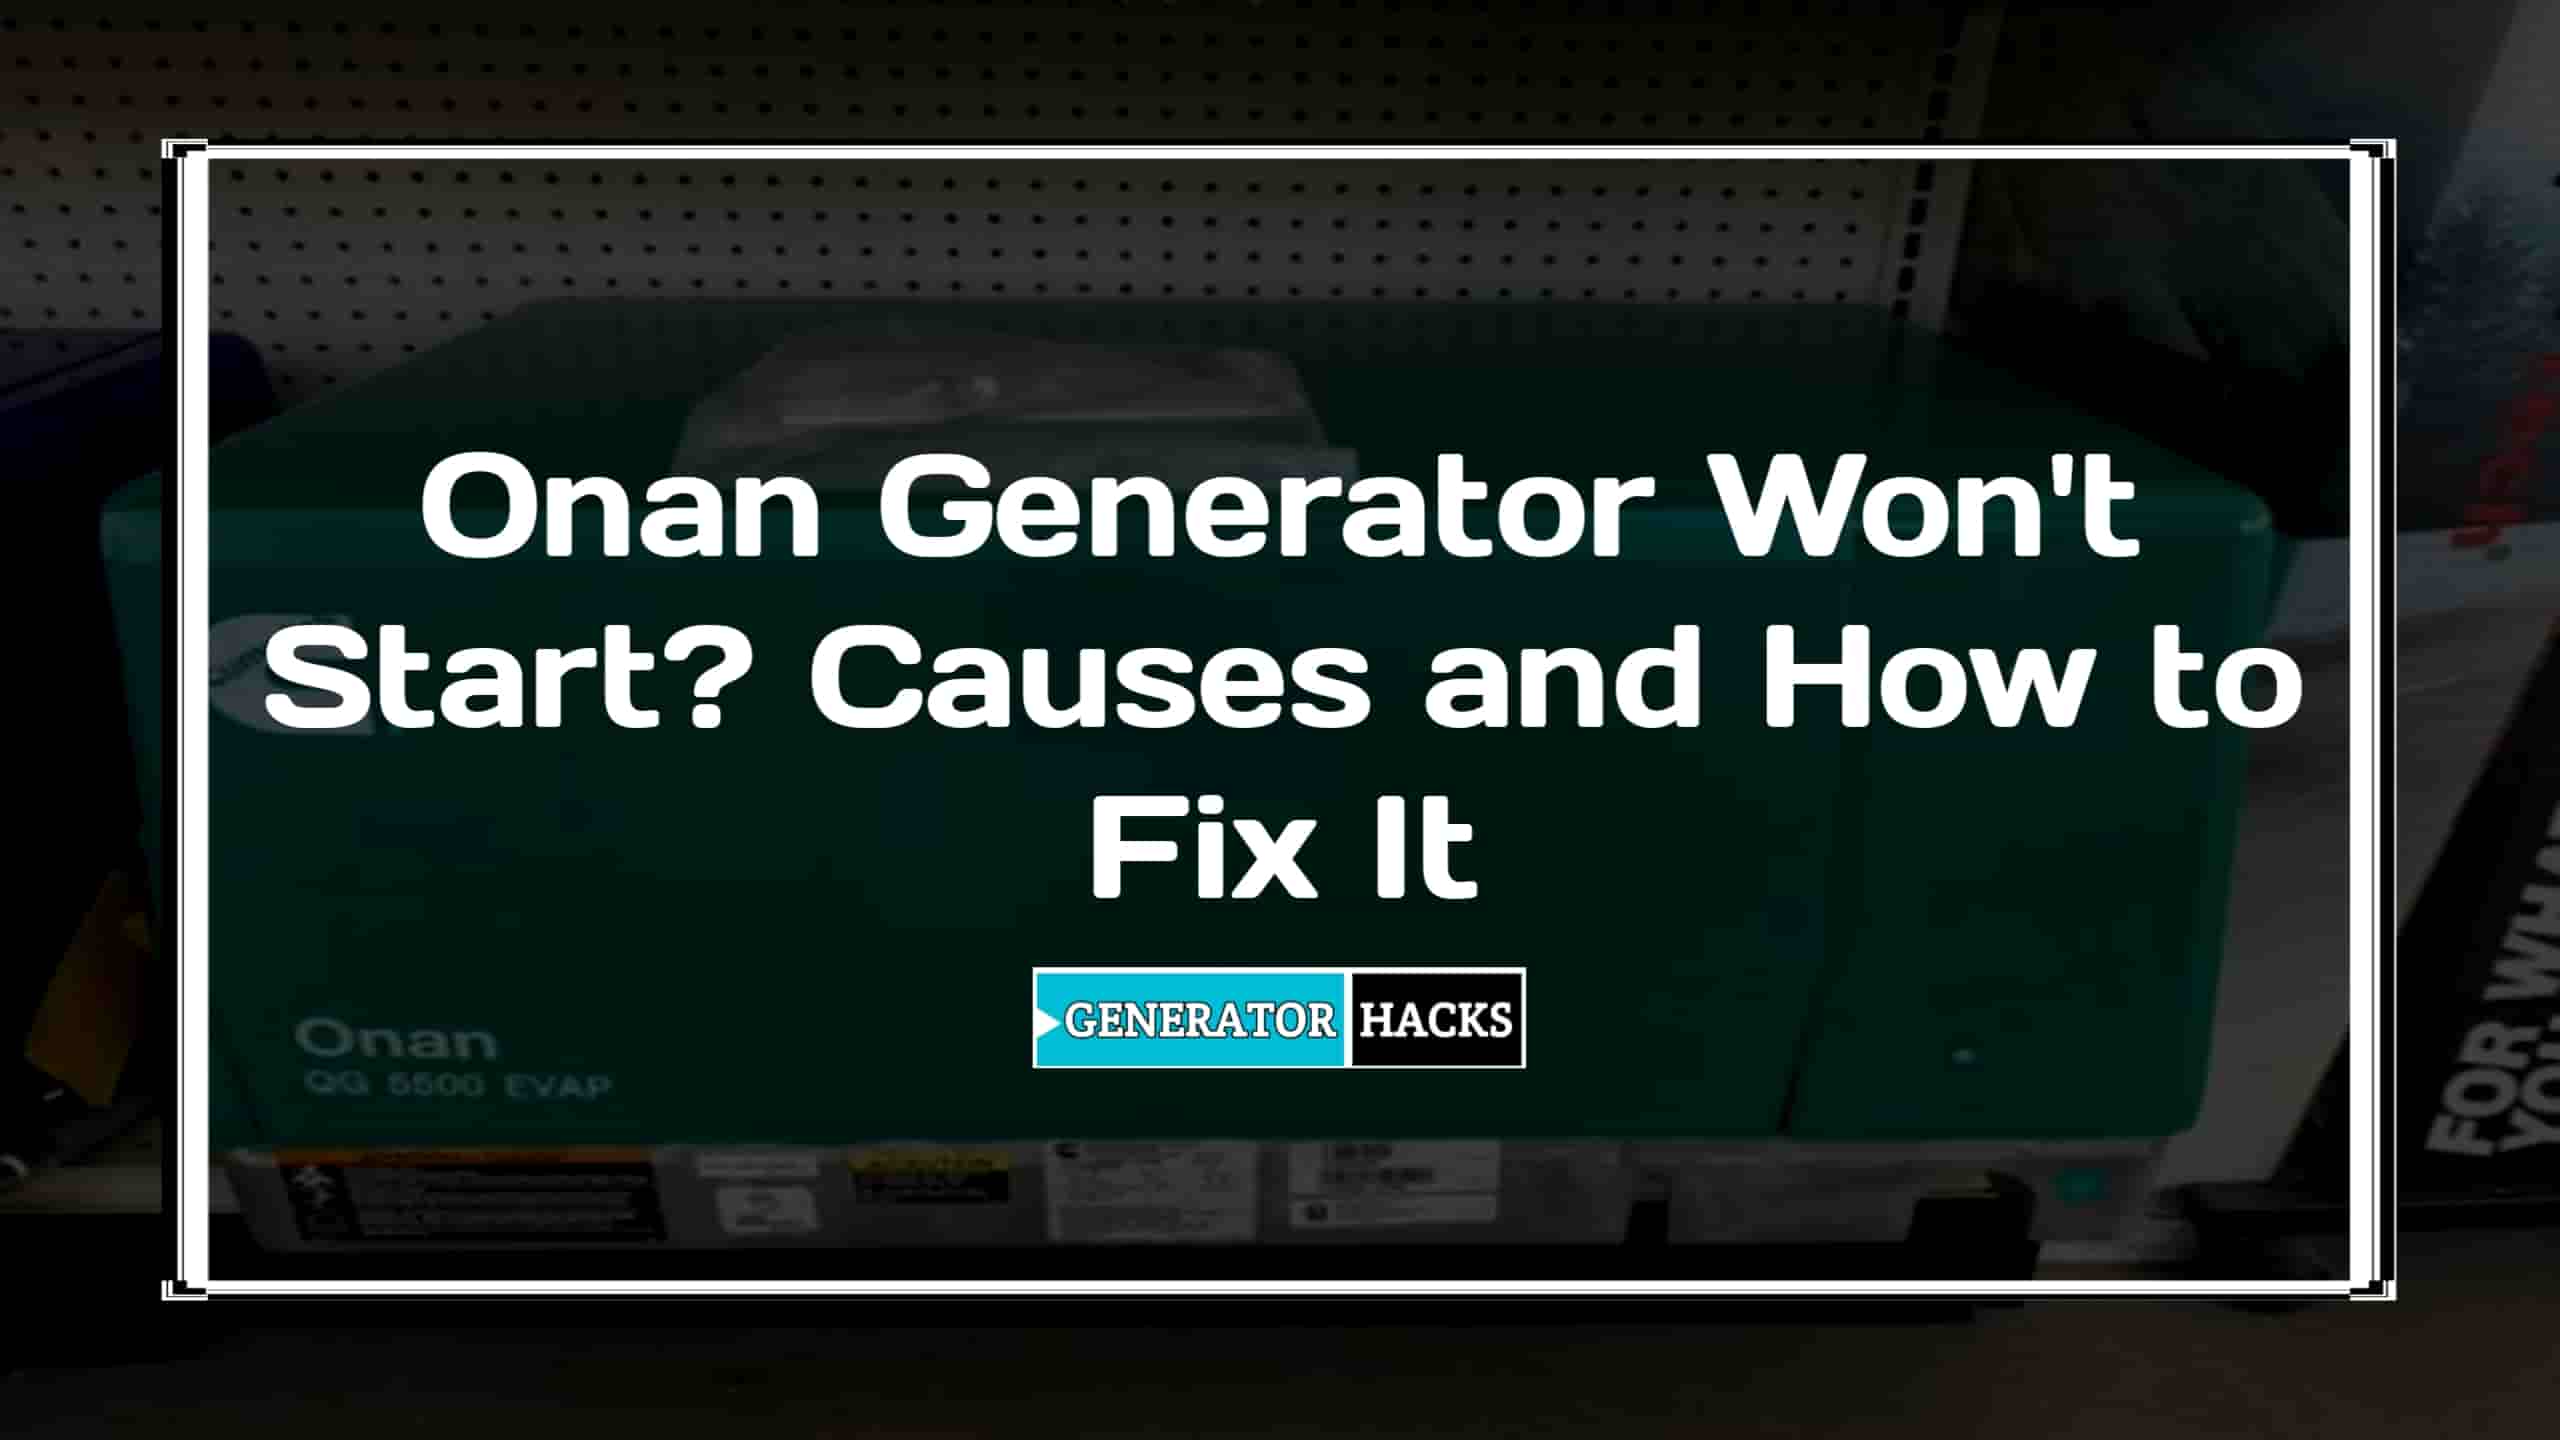 Onan Generator Won’t Start? Causes and How to Fix It